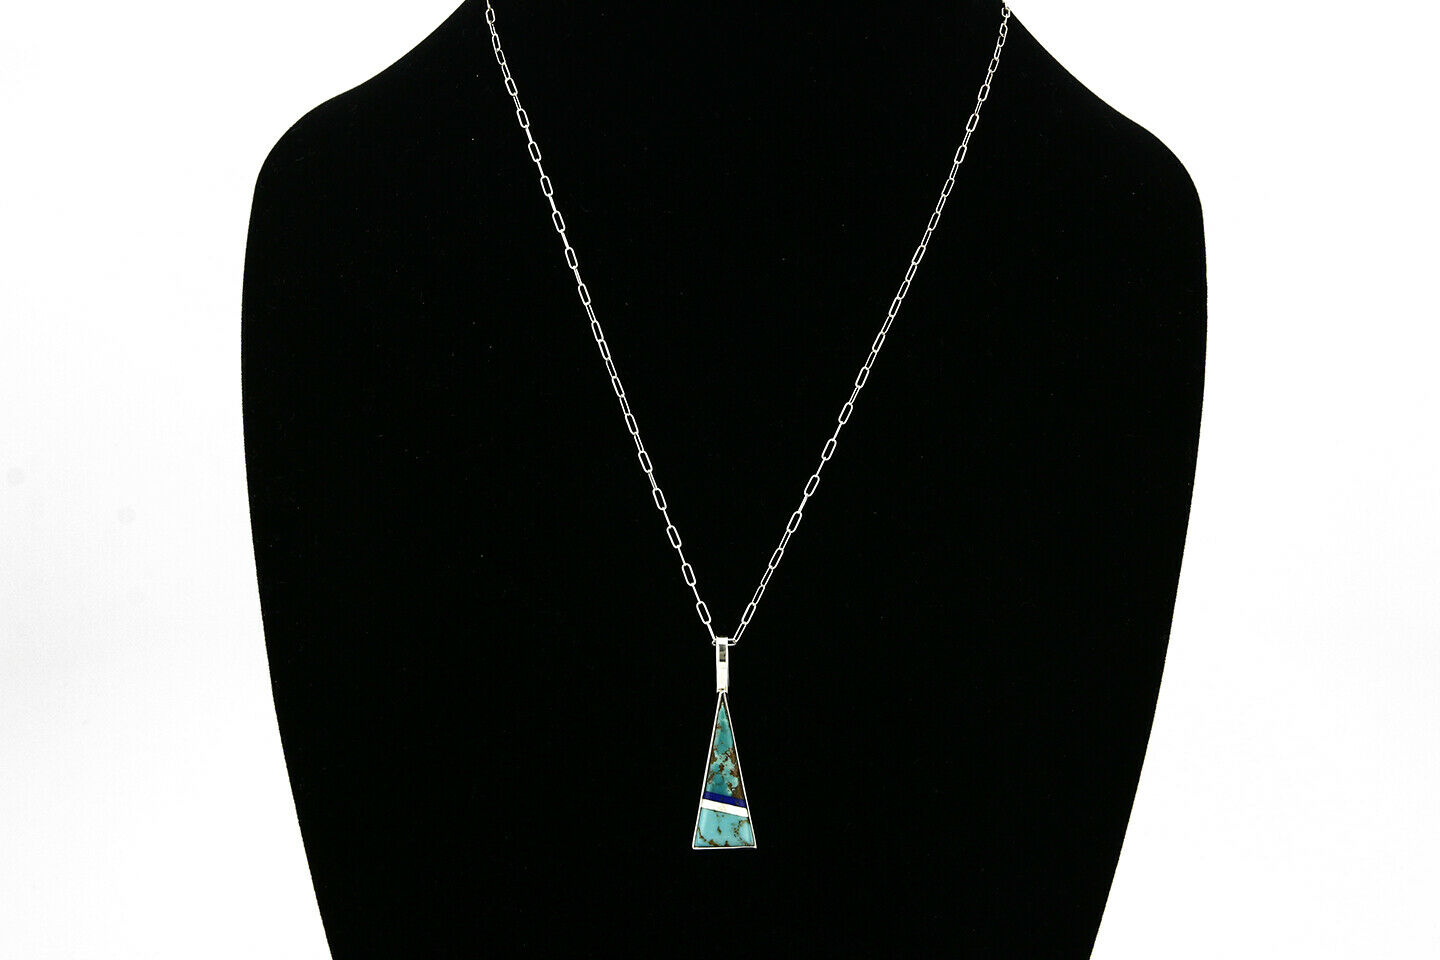 Women's Inlaid Pendant .925 Silver Turquoise & Gemstone Necklace